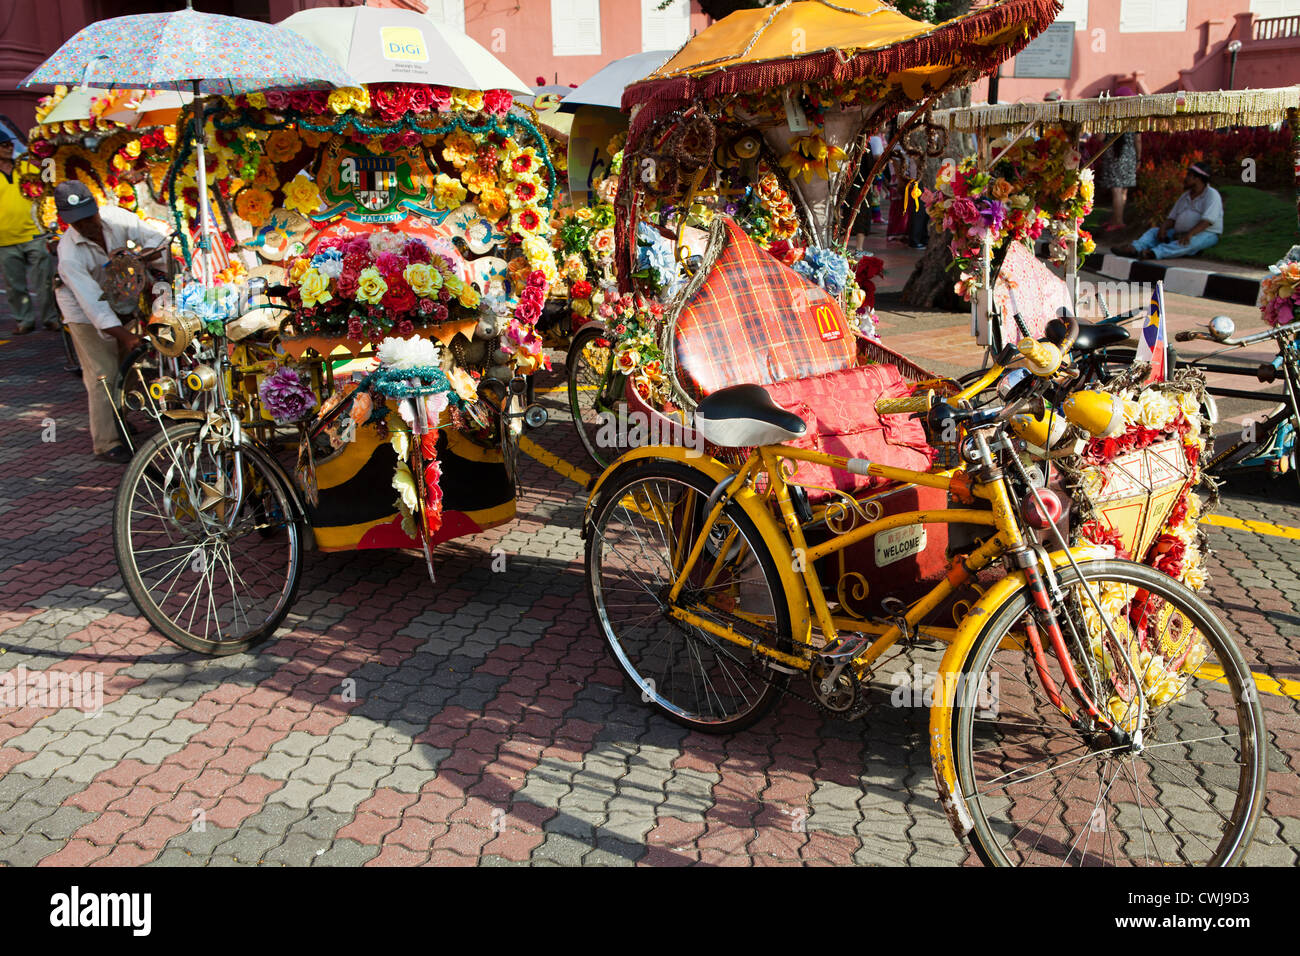 The trishaws in Melaka are colorful with lots of decorations, each with their own individual design and add flambouyant colors Stock Photo